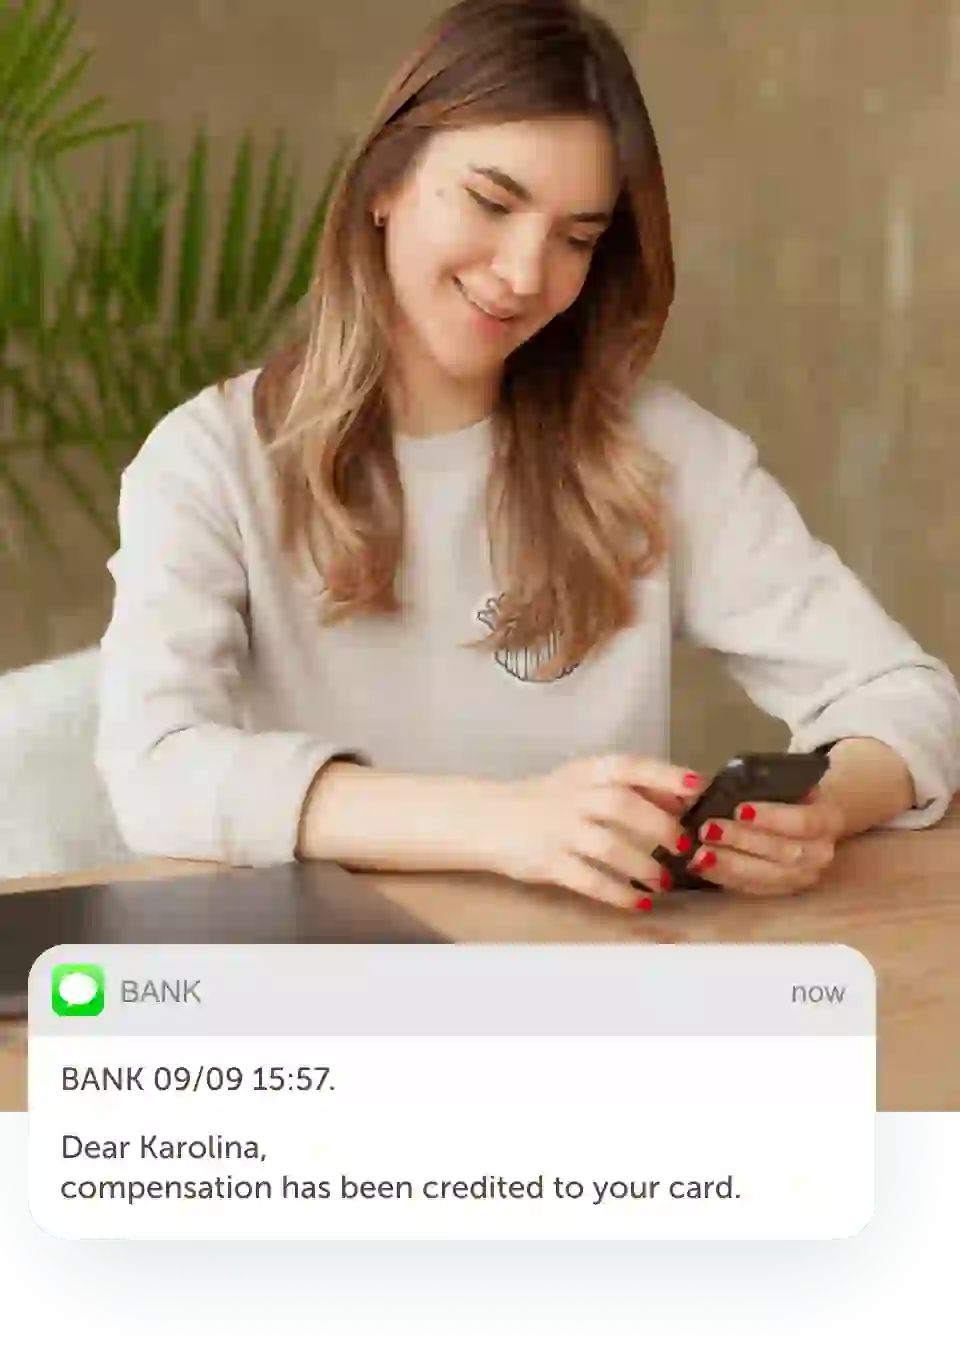 A message from a bank that pops up on the smartphone reading that compensation has been credited to the card